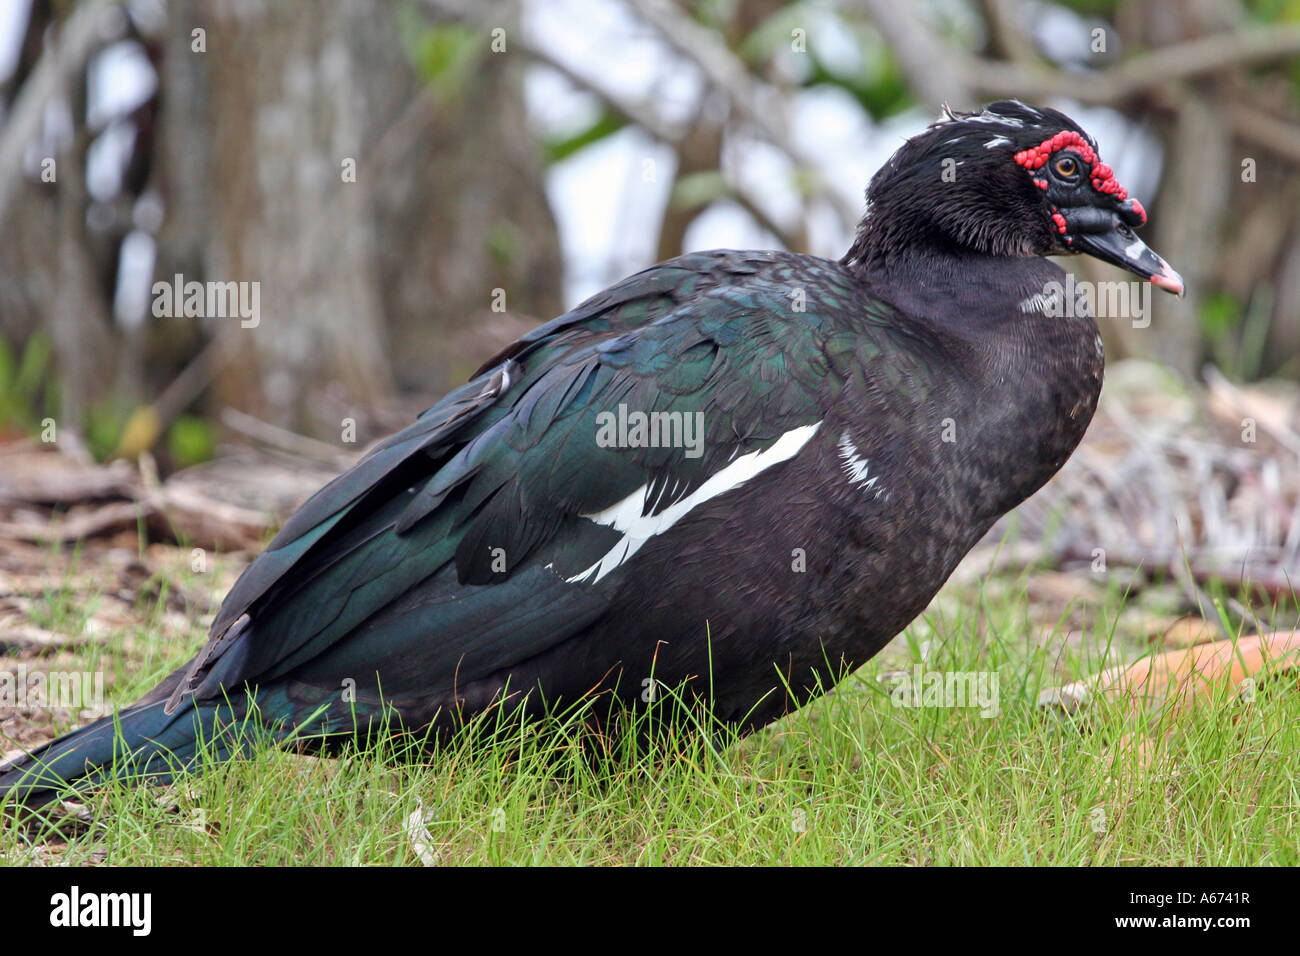 Muscovy Duck full view profile Stock Photo